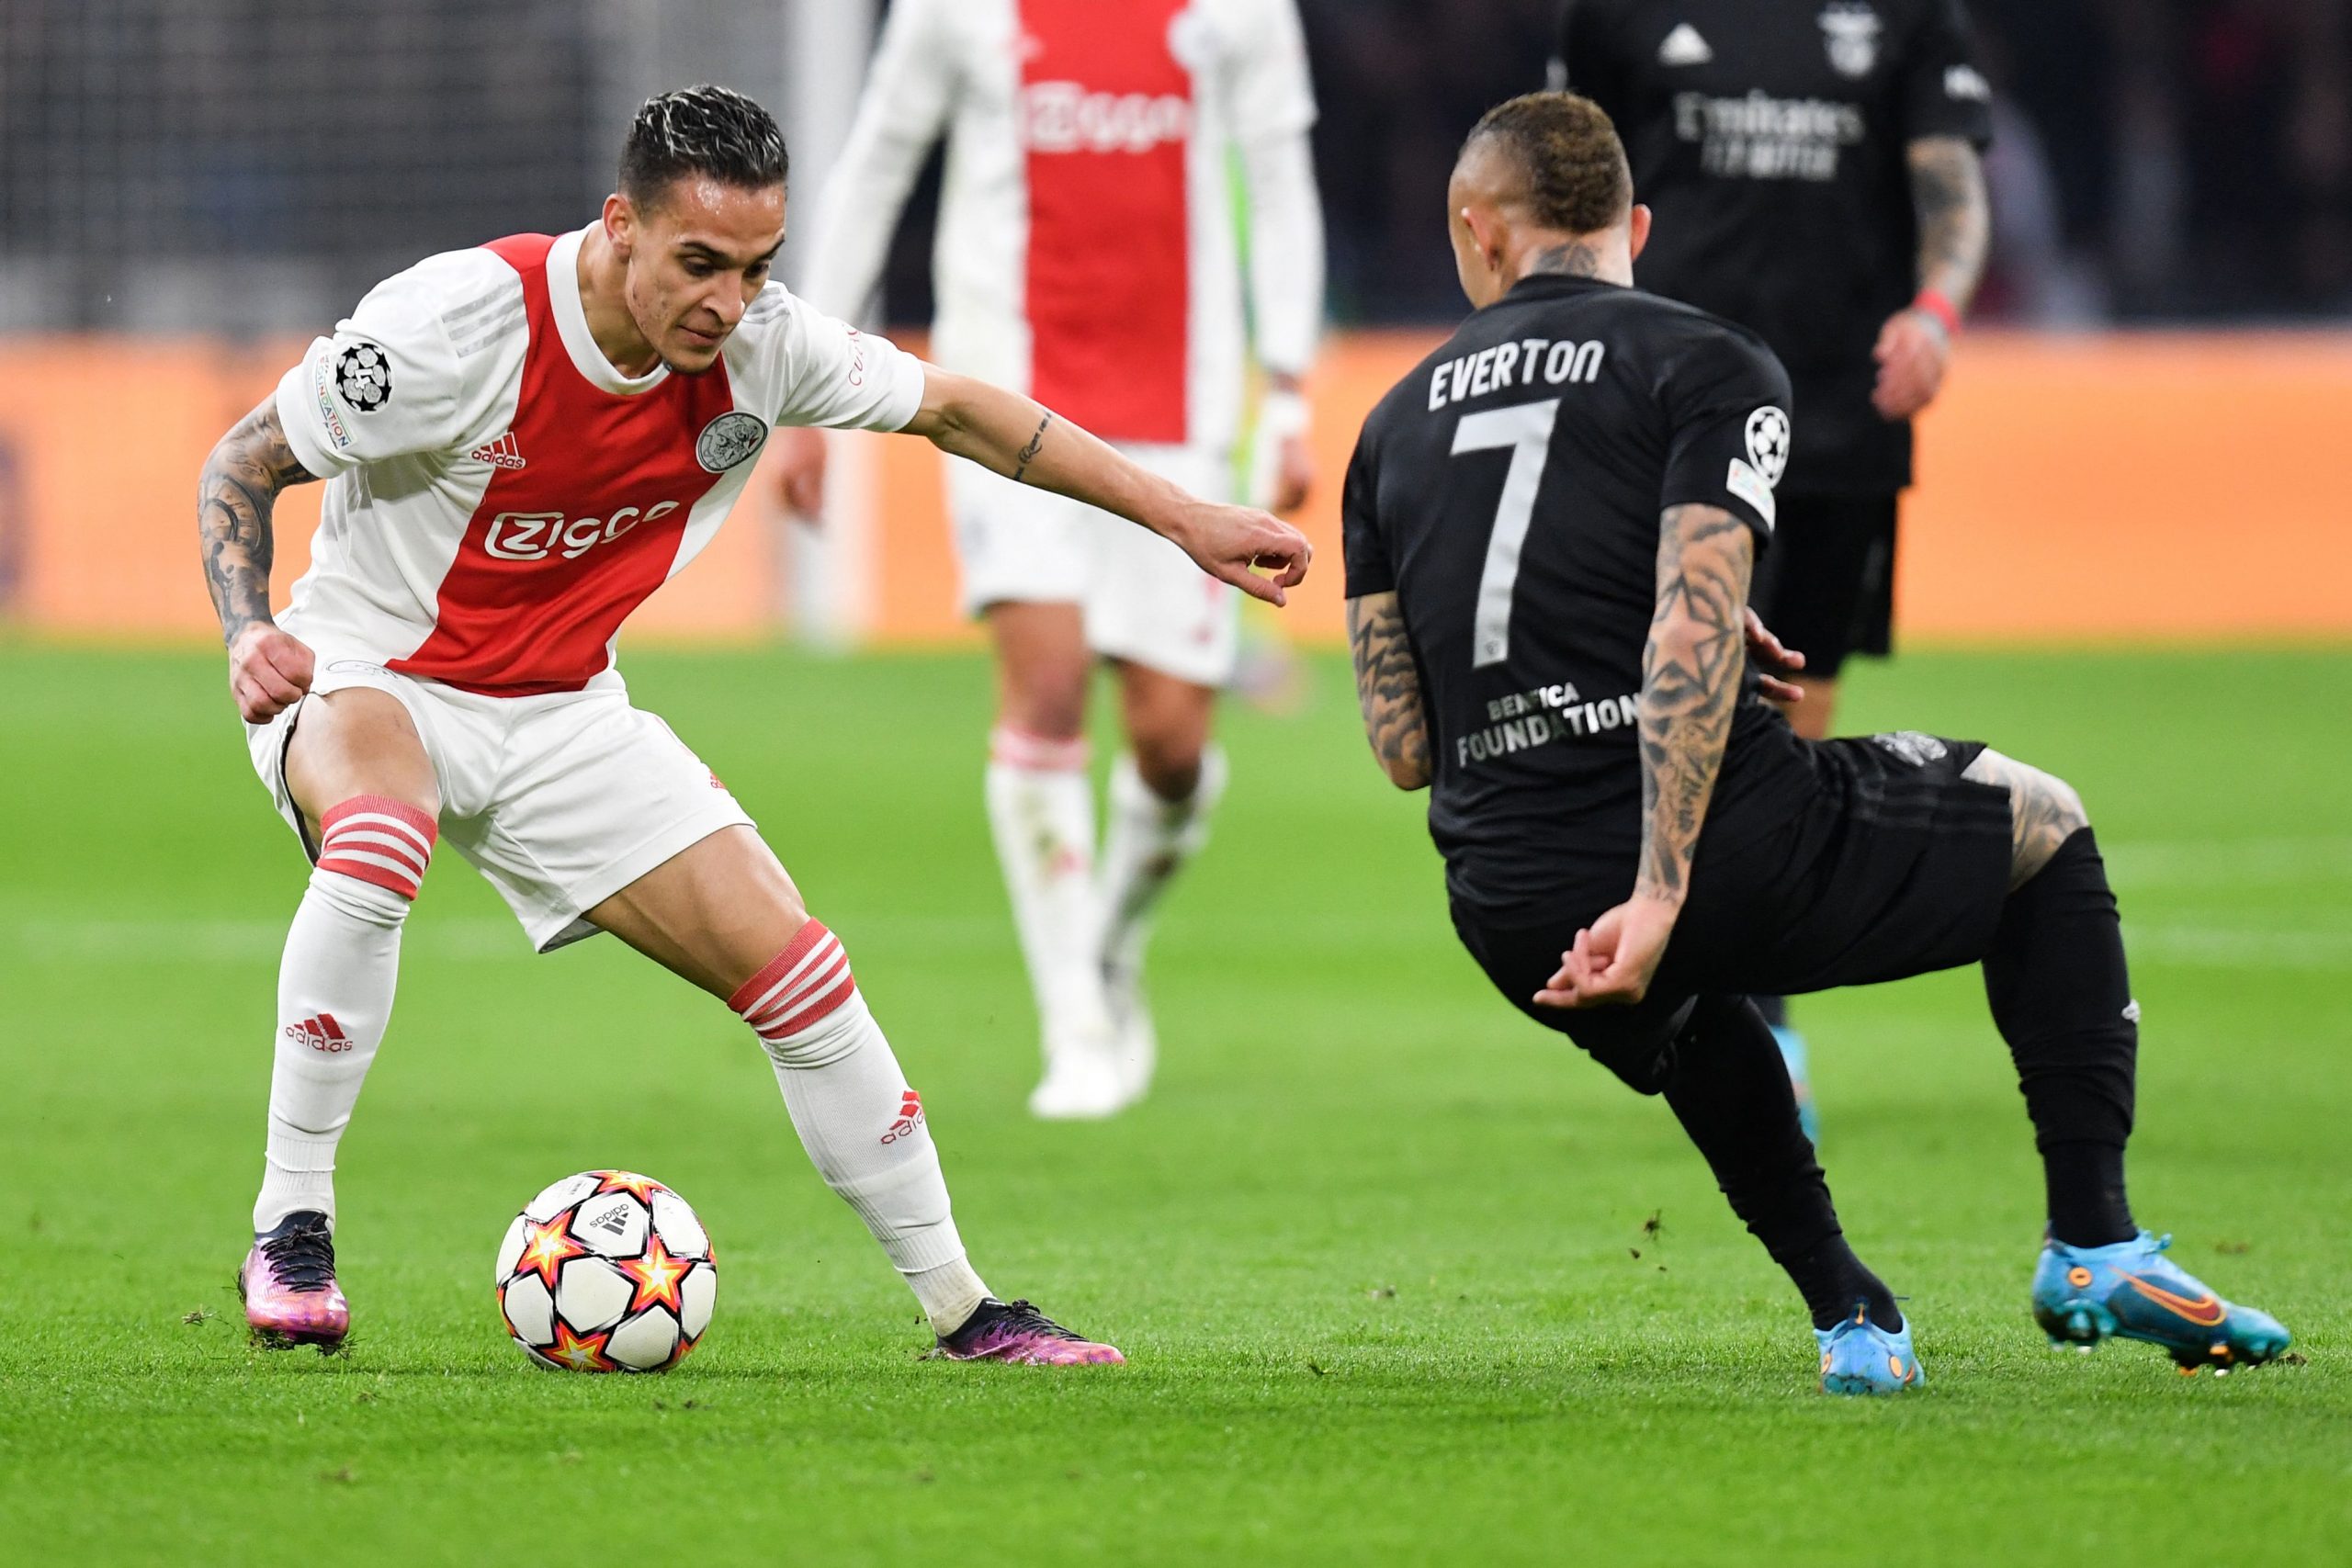 Ajax forward wants to join Manchester United immediately